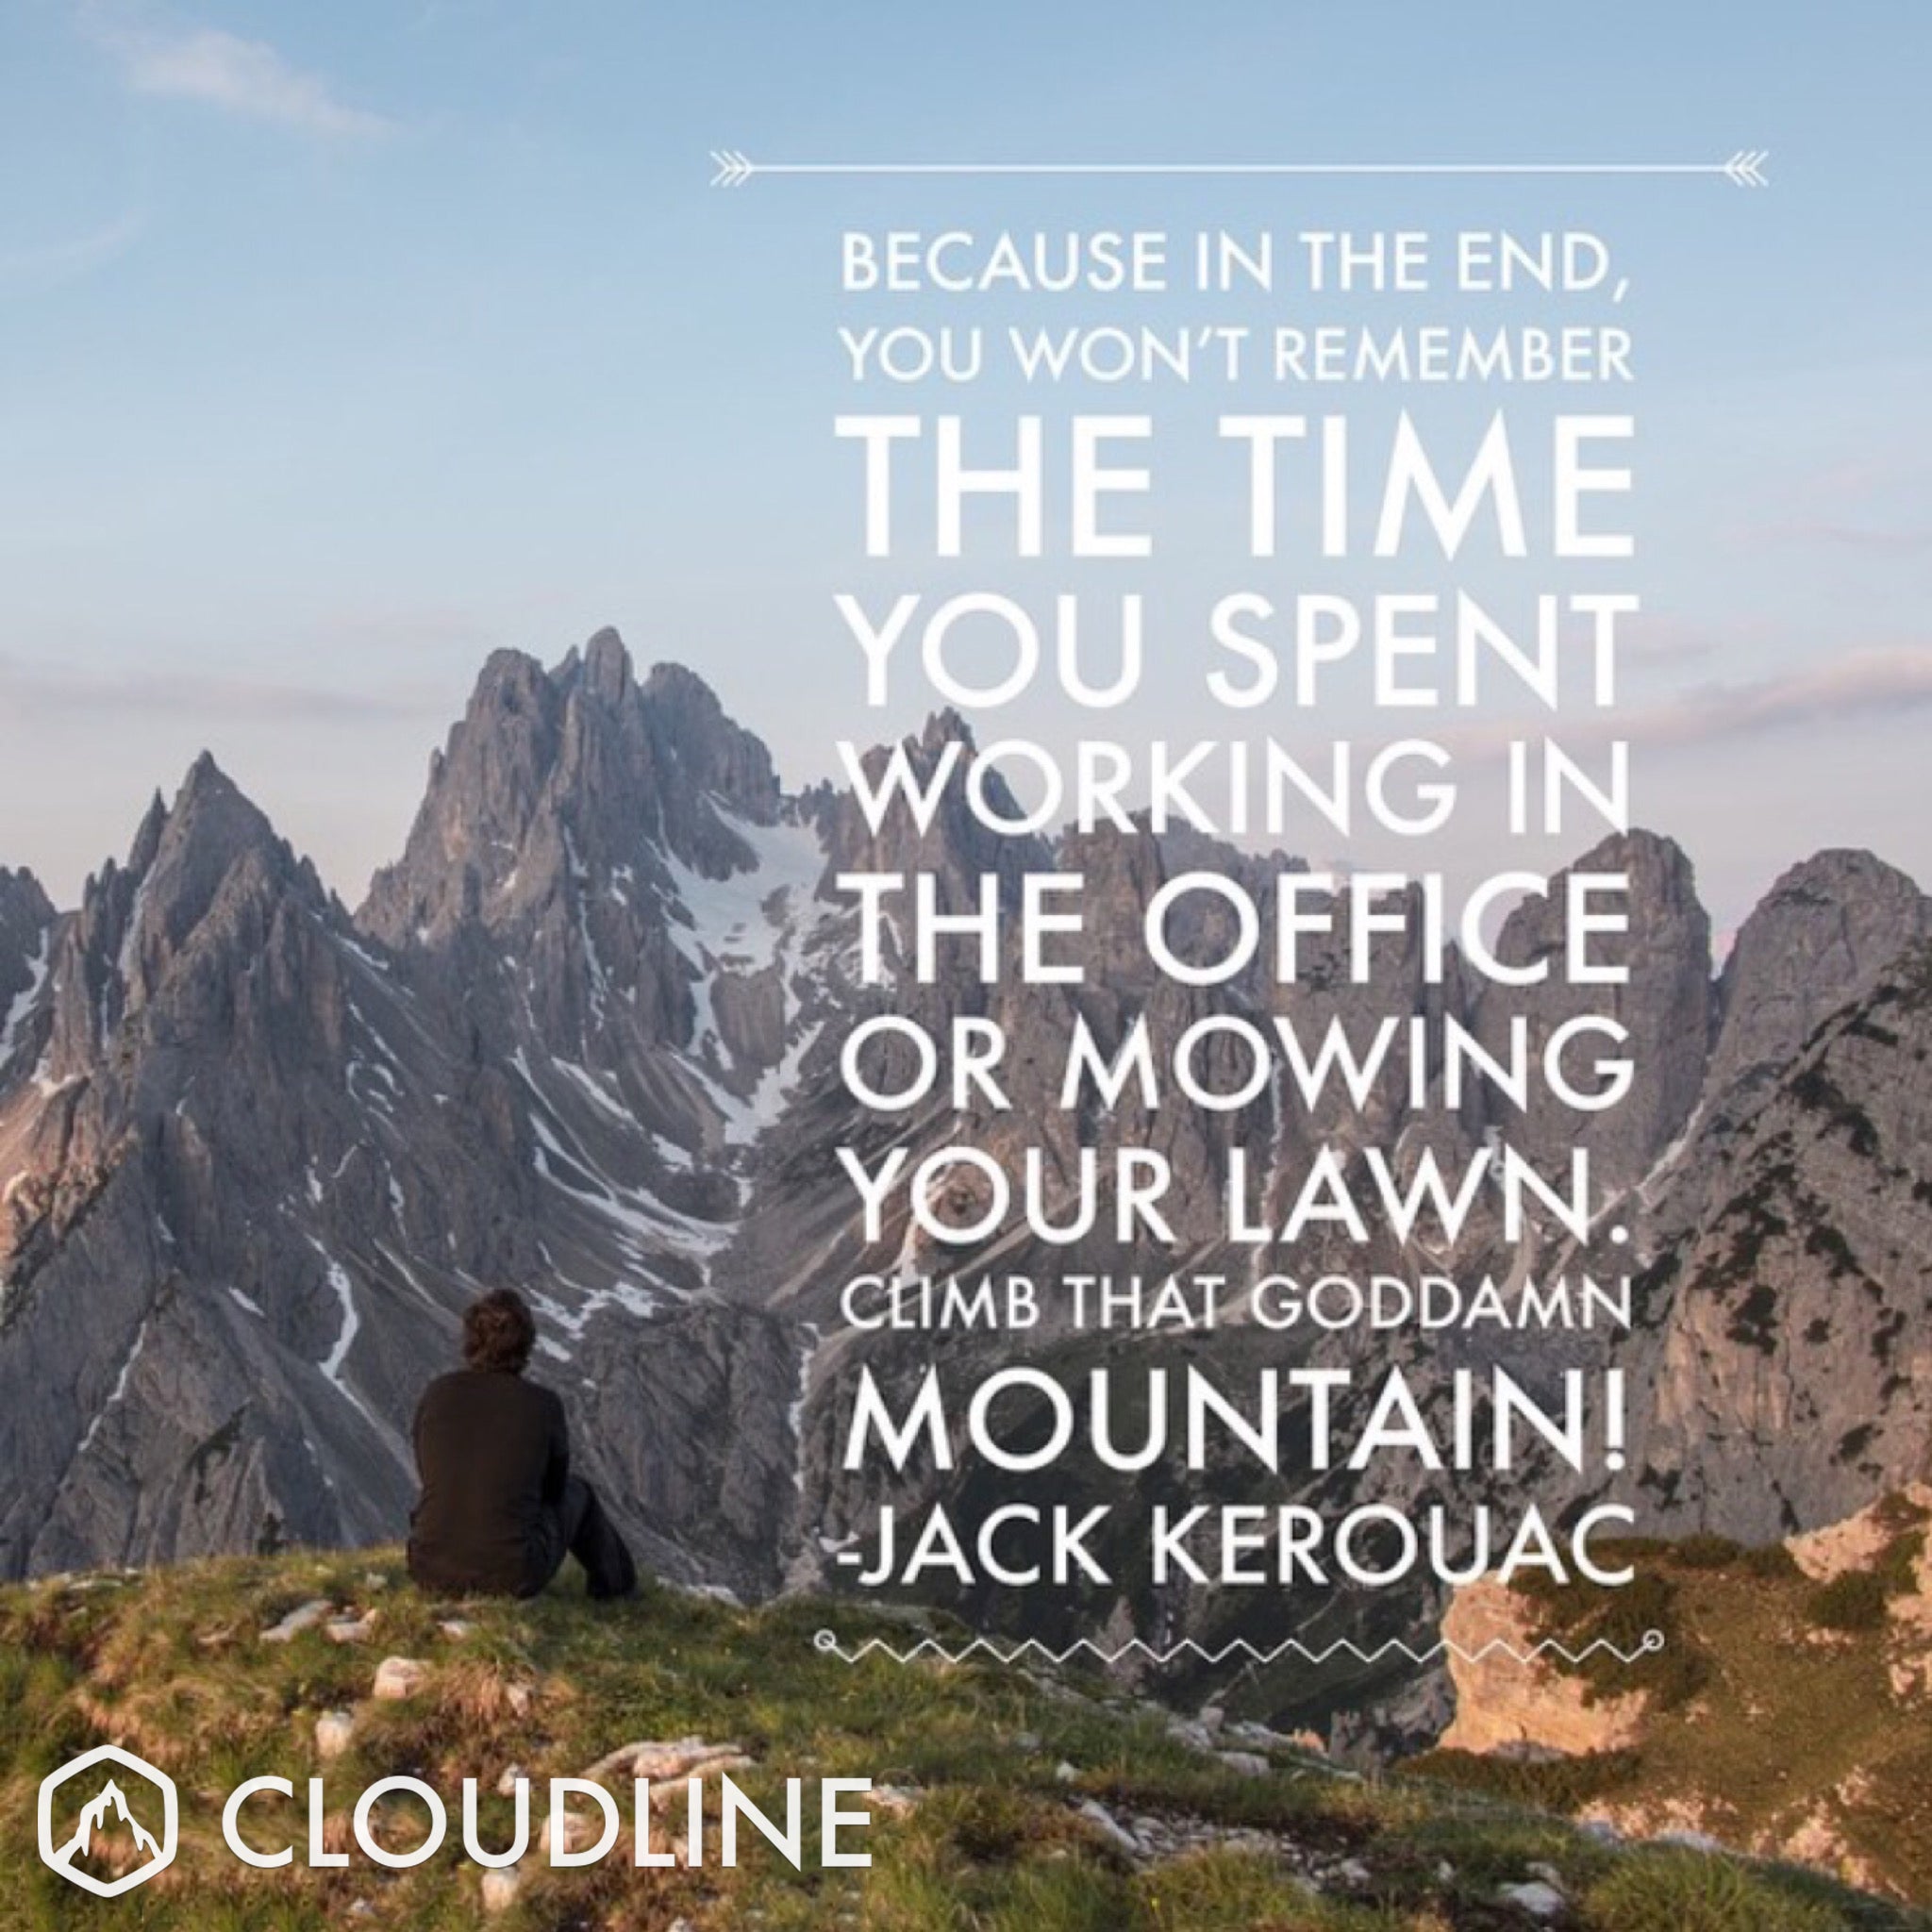 Because in the end you wont remember the time you spent working in the office or mowing your lawn. Climb that goddamn mountain! - Jack Kerouac